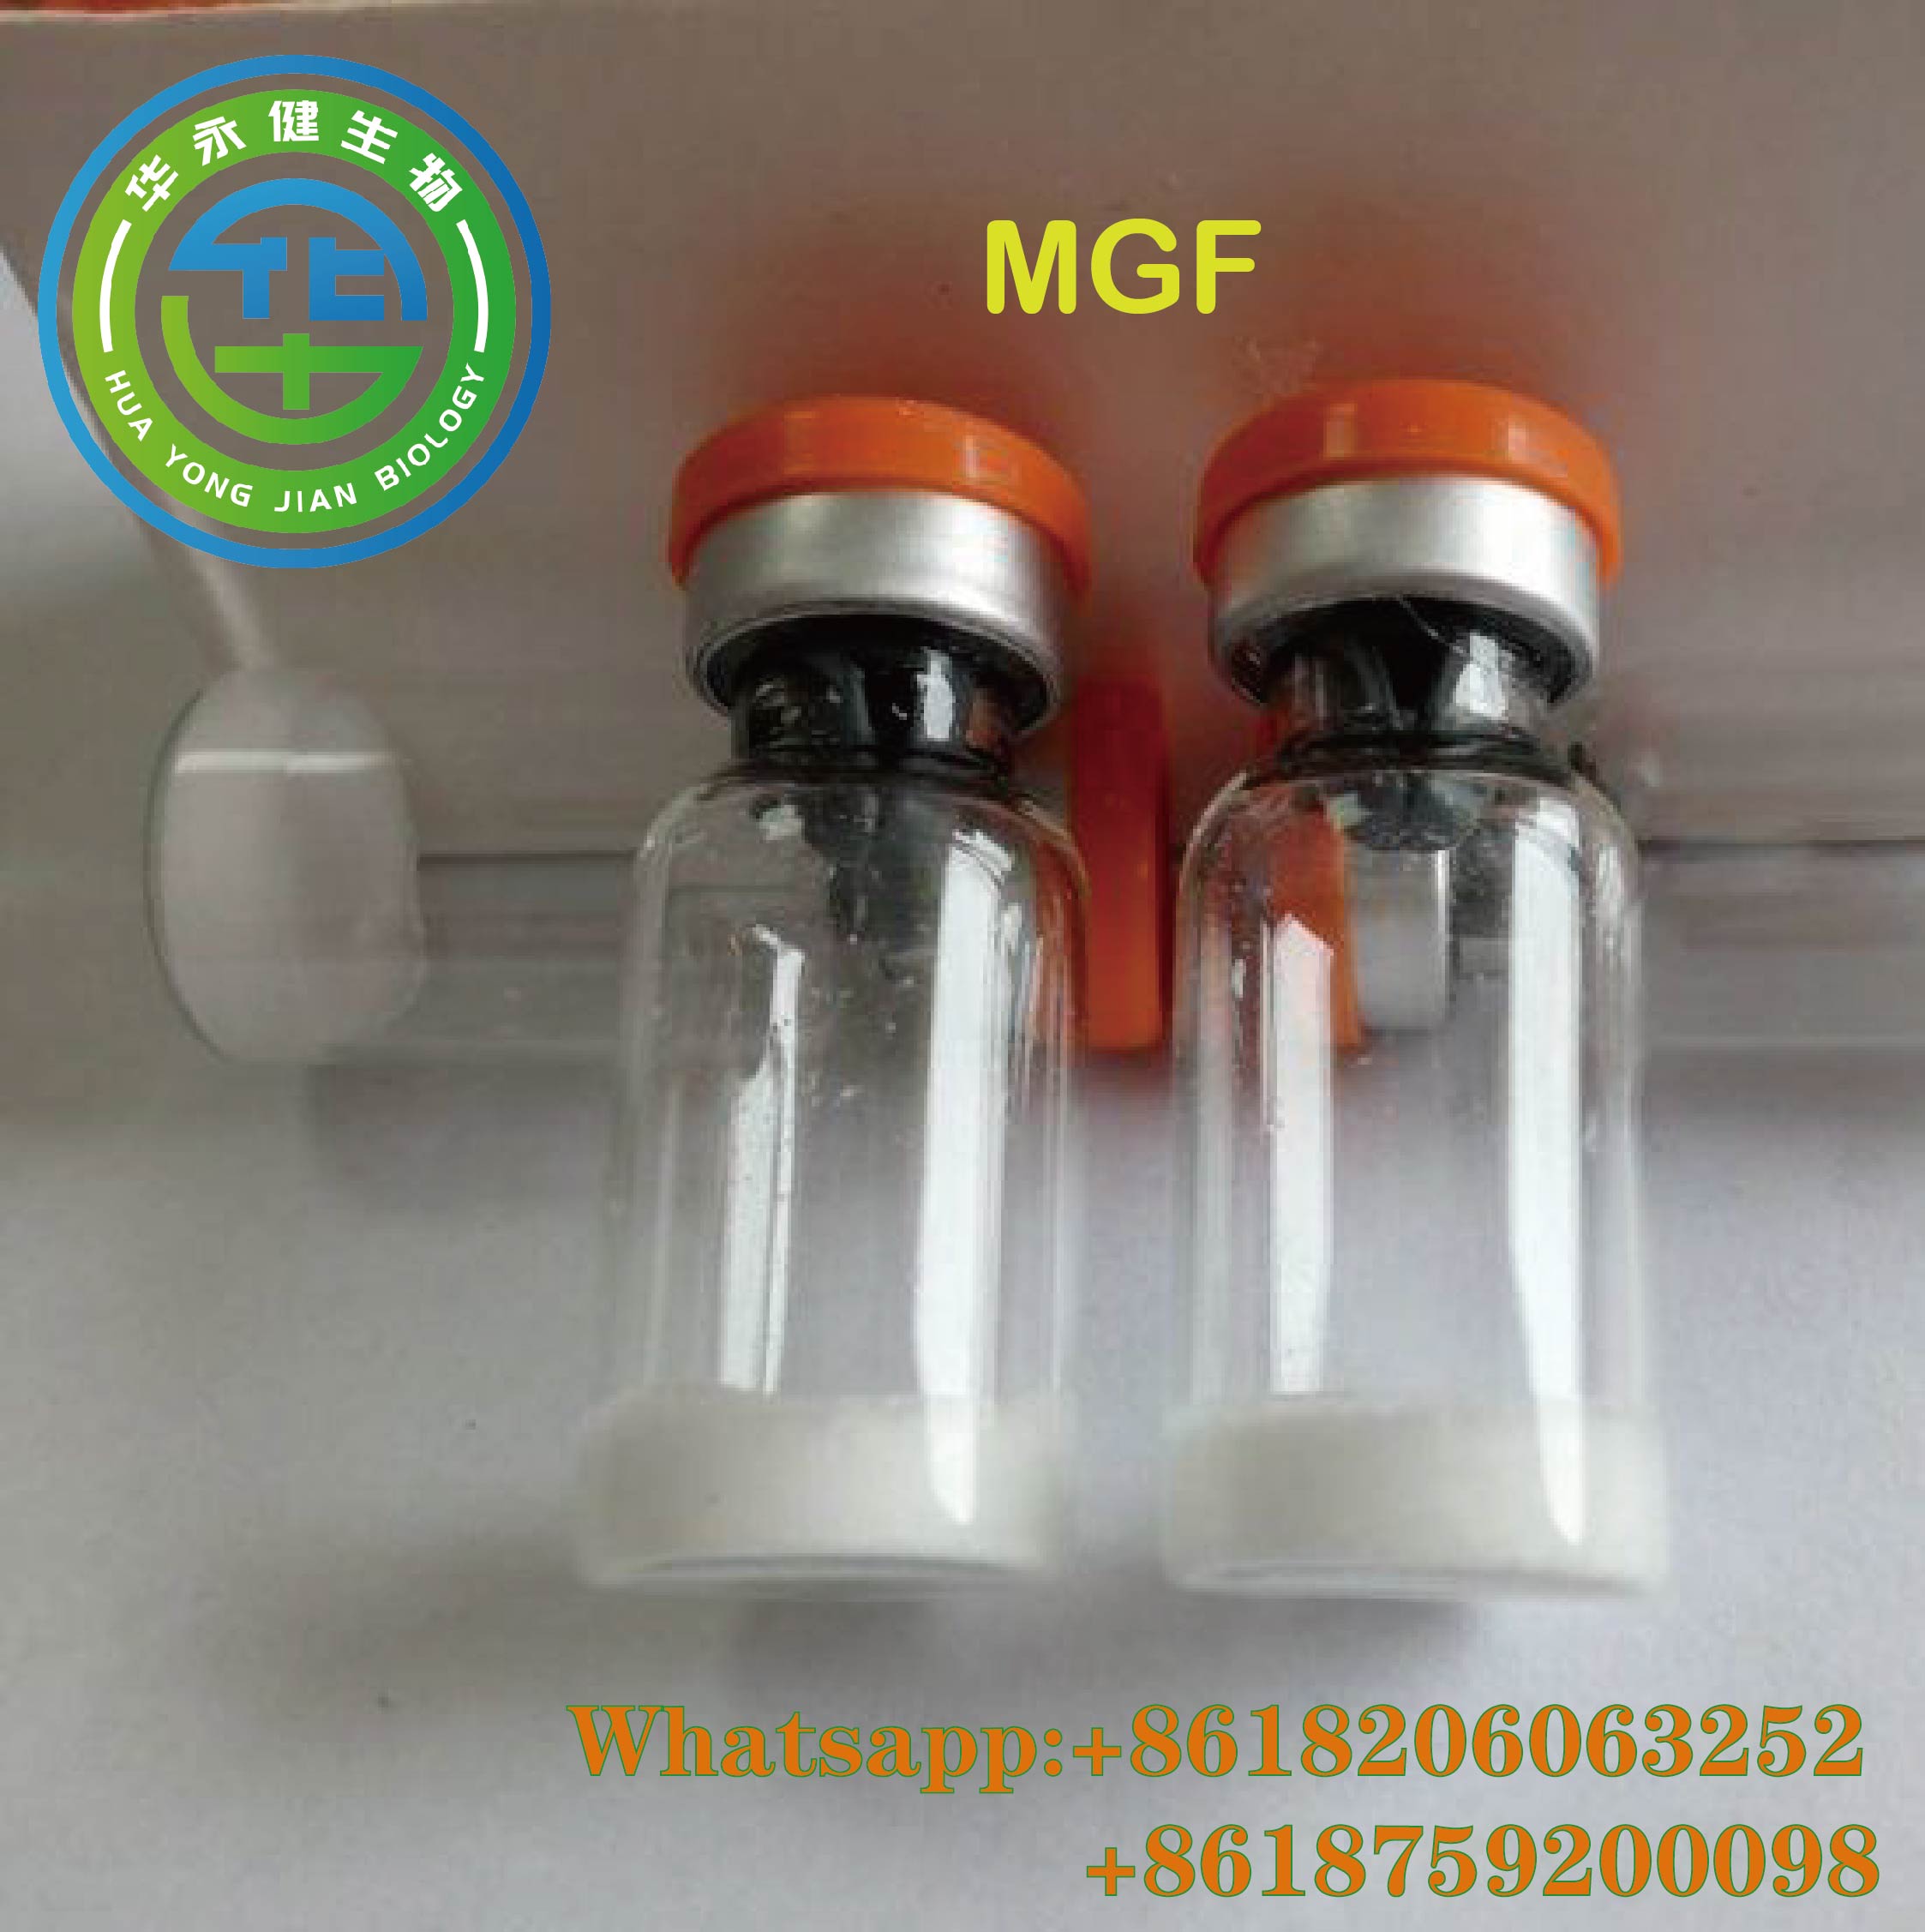 99% Purity Muscle Building Peptides Steroids MGF for Bodybuilding